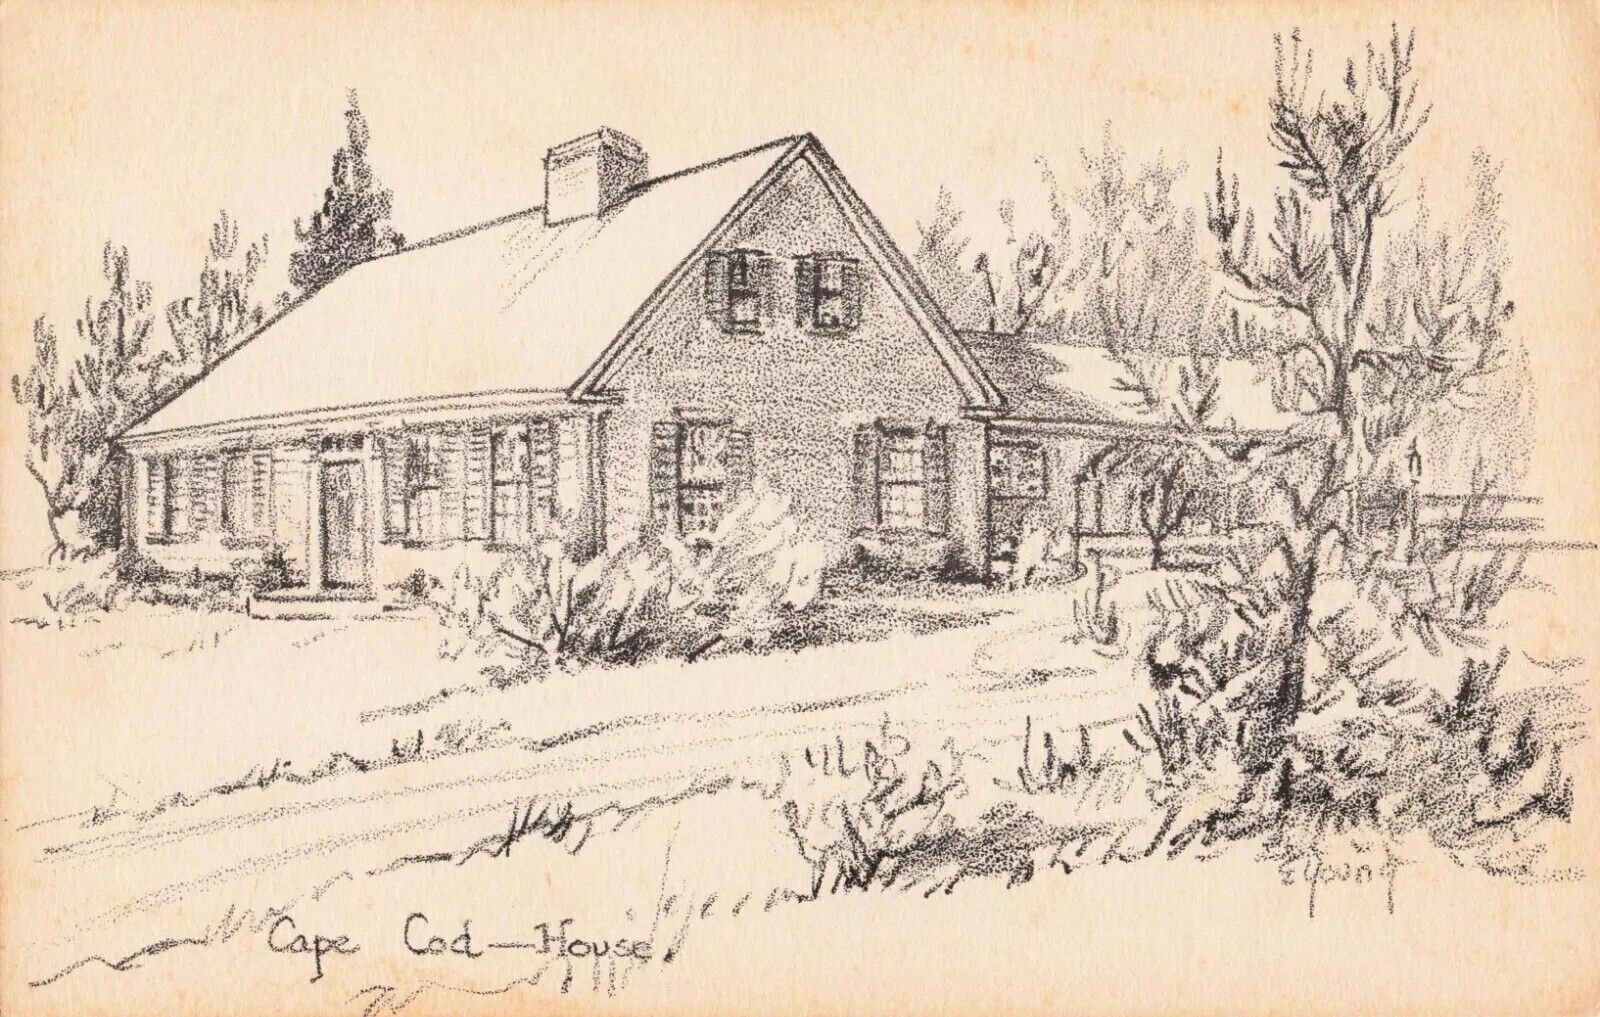 Drawing of a House on Cape Cod by E Young - Massachusetts MA - Postcard